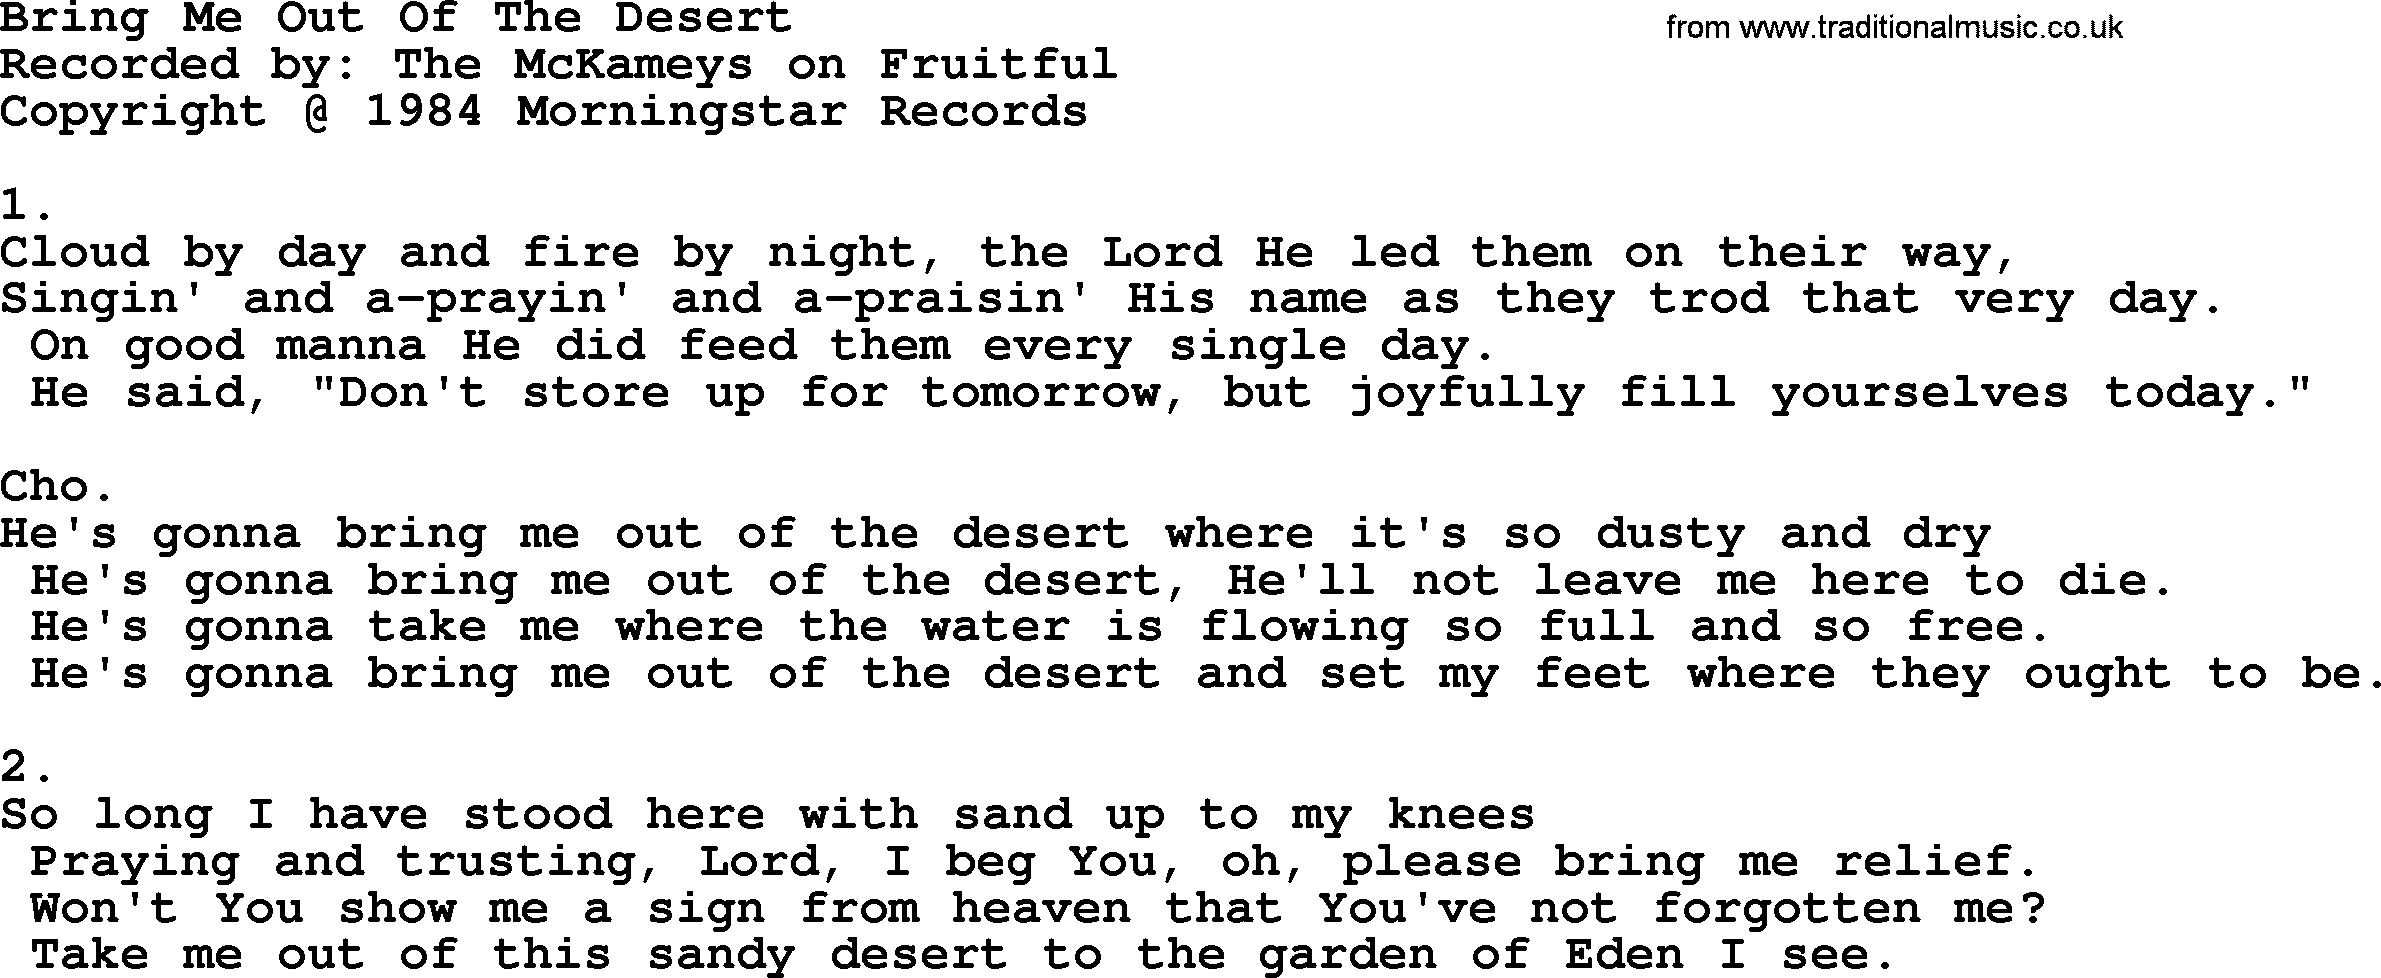 Apostolic & Pentecostal Hymns and Songs, Hymn: Bring Me Out Of The Desert lyrics and PDF